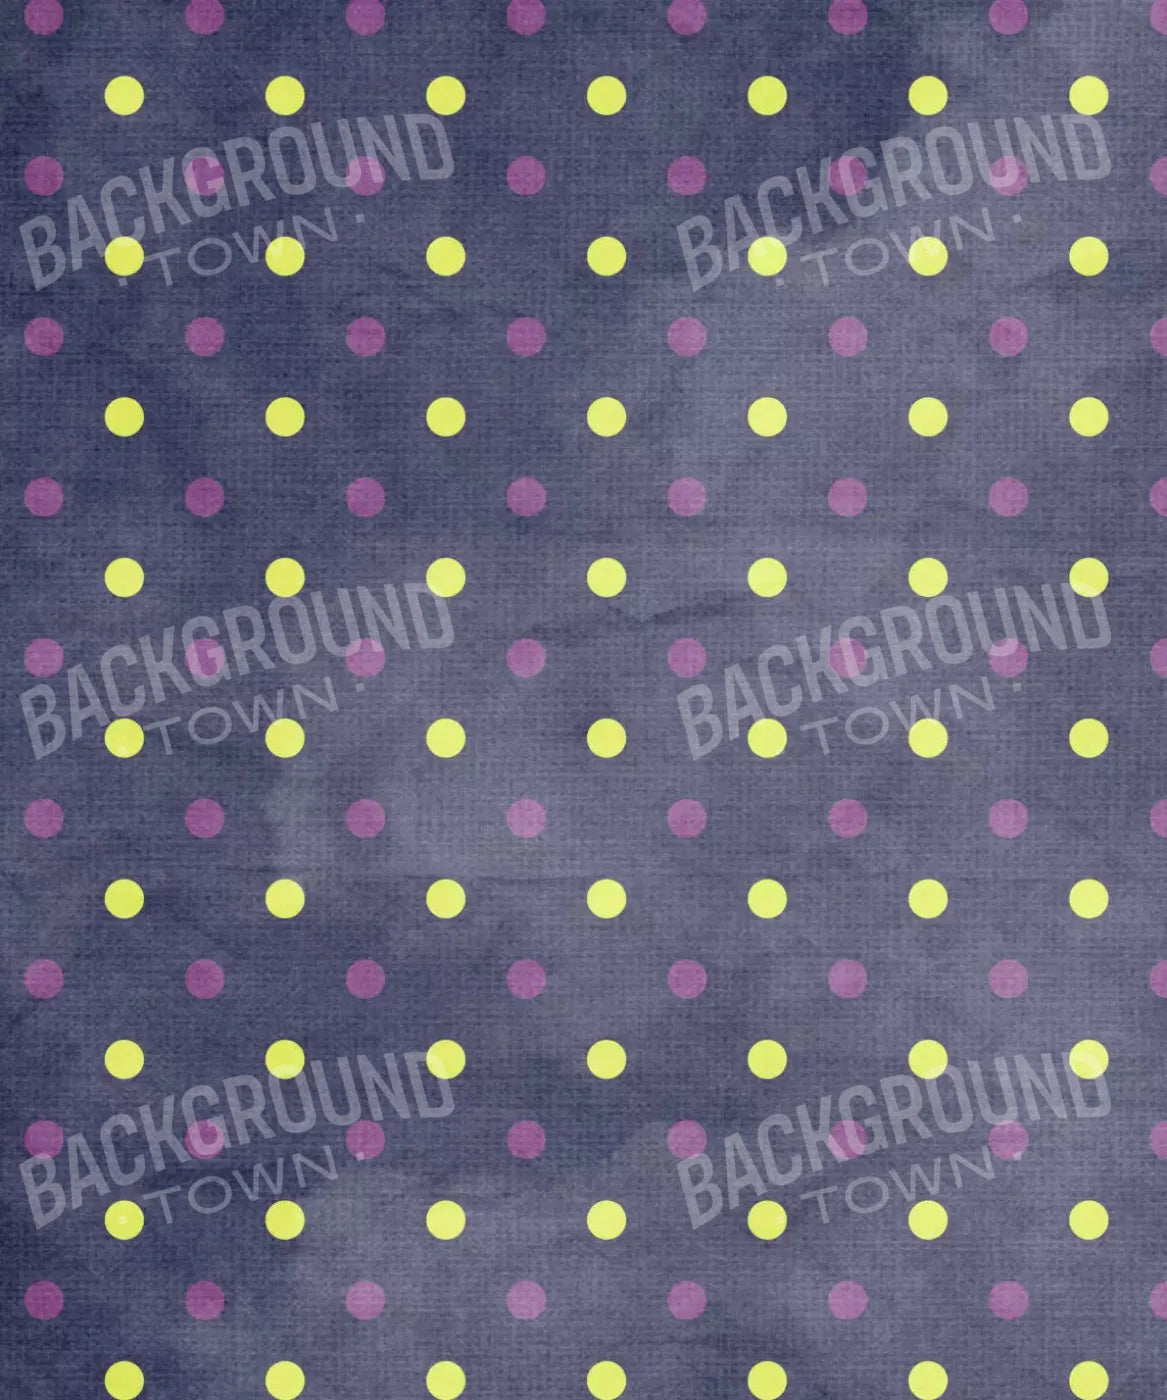 Purple Pattern Backdrop for Photography